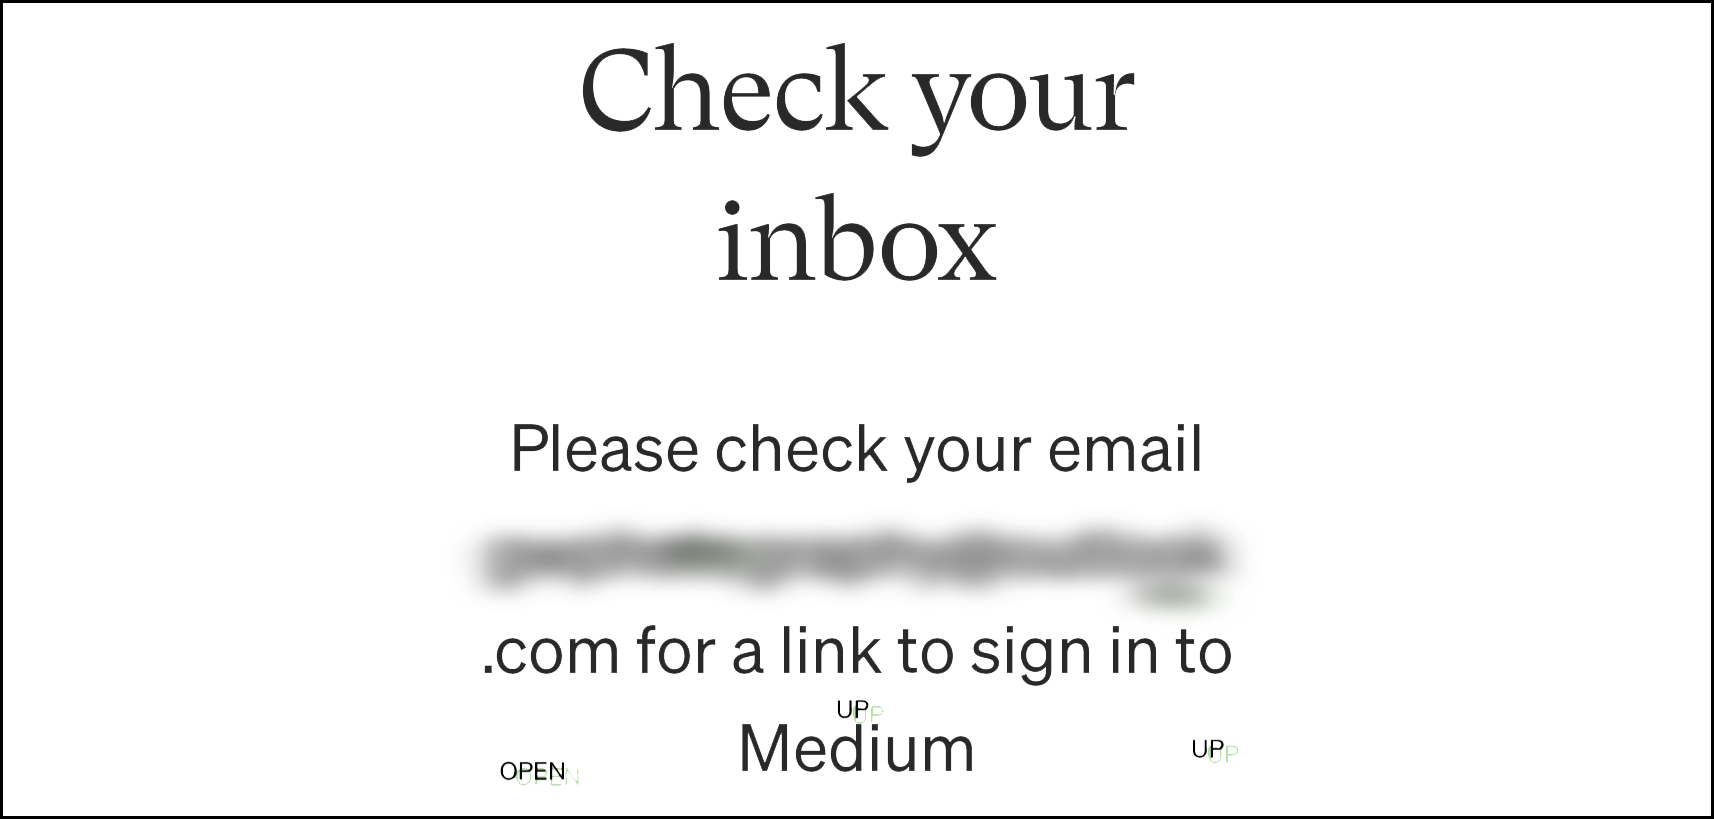 Why Does Medium Do This?